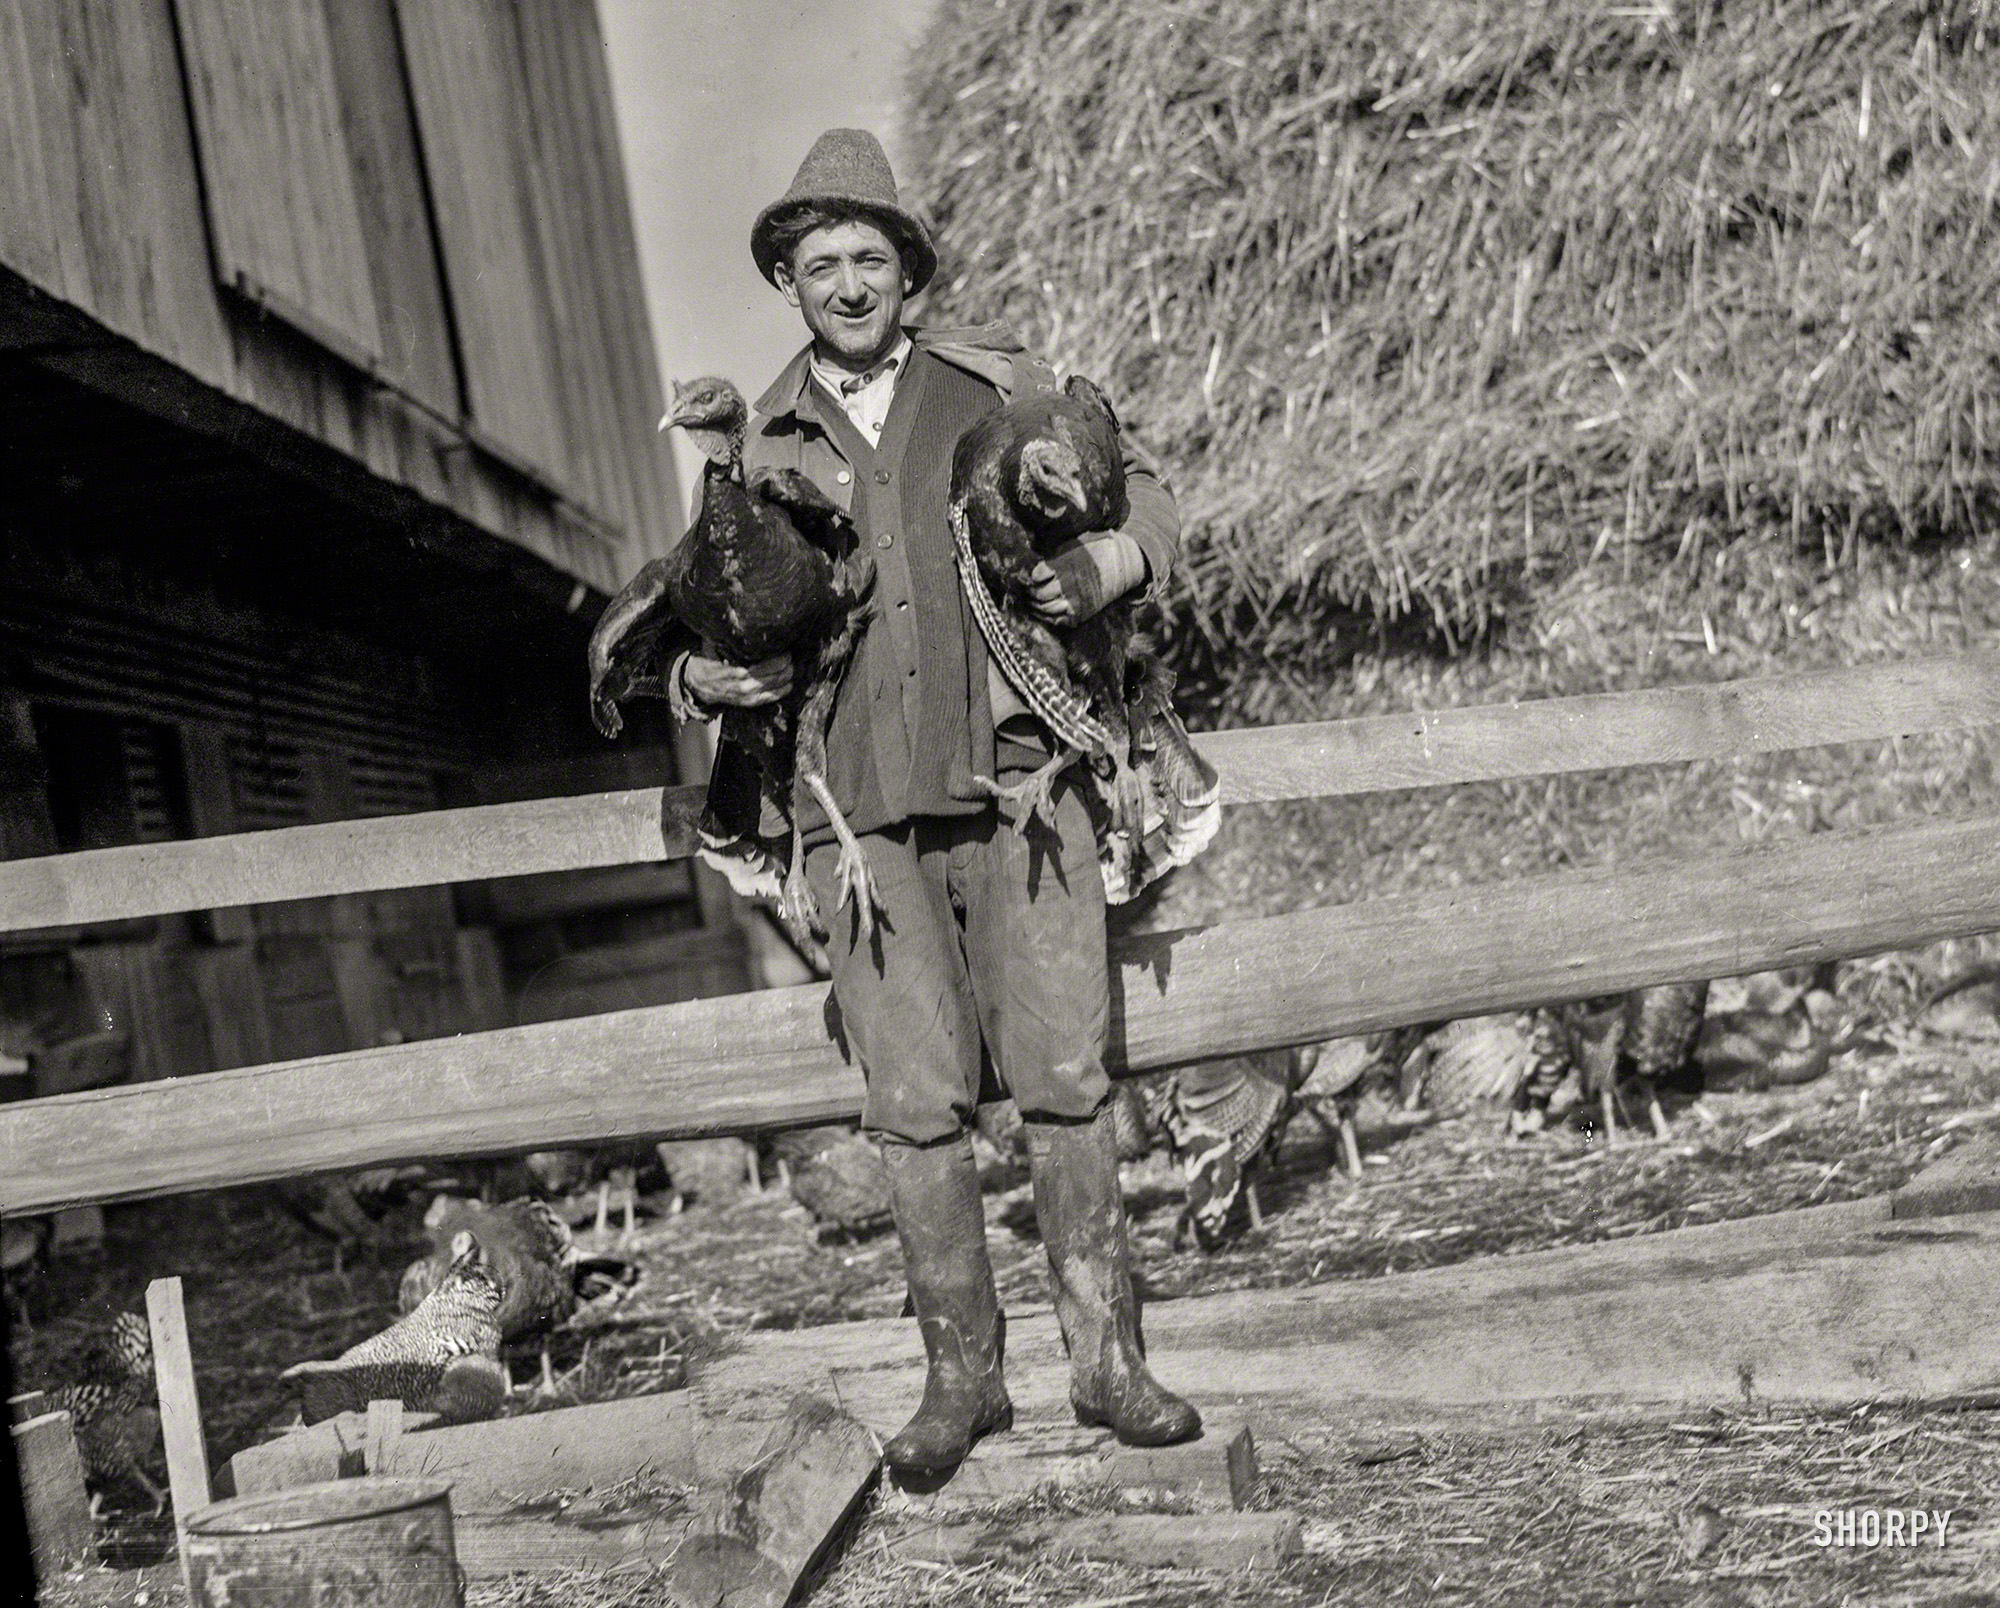 "W.S. Day of Greenwood Farm, Dawsonville, Maryland, Nov. 13, 1925." National Photo Company Collection glass negative. View full size.